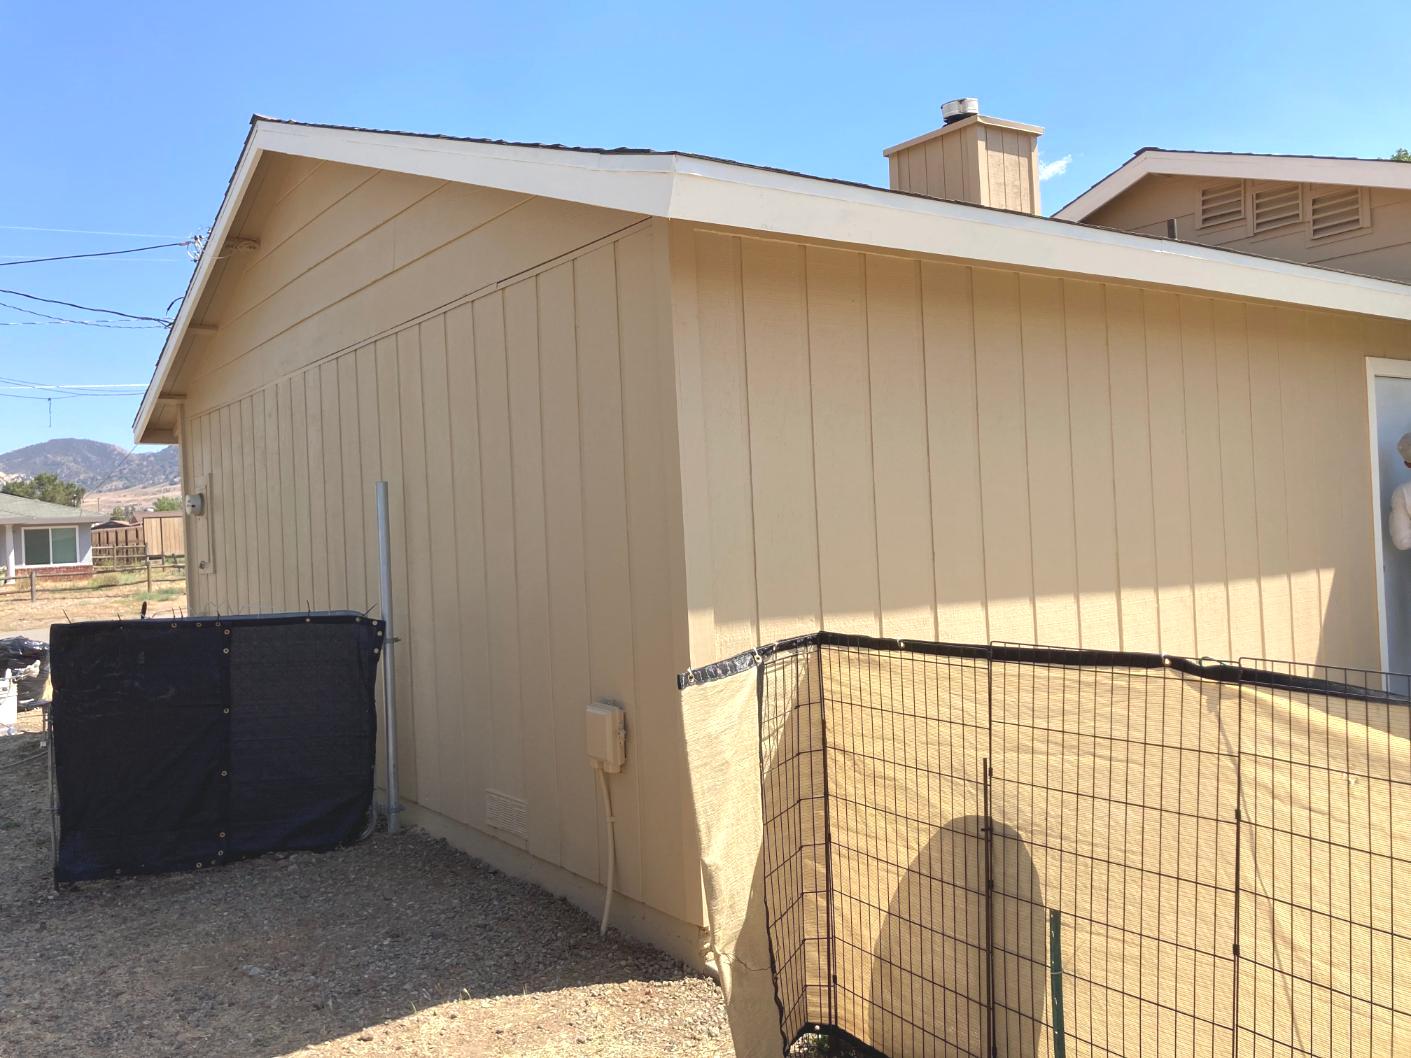 TexCote Coolwall Application in Tehachapi, CA